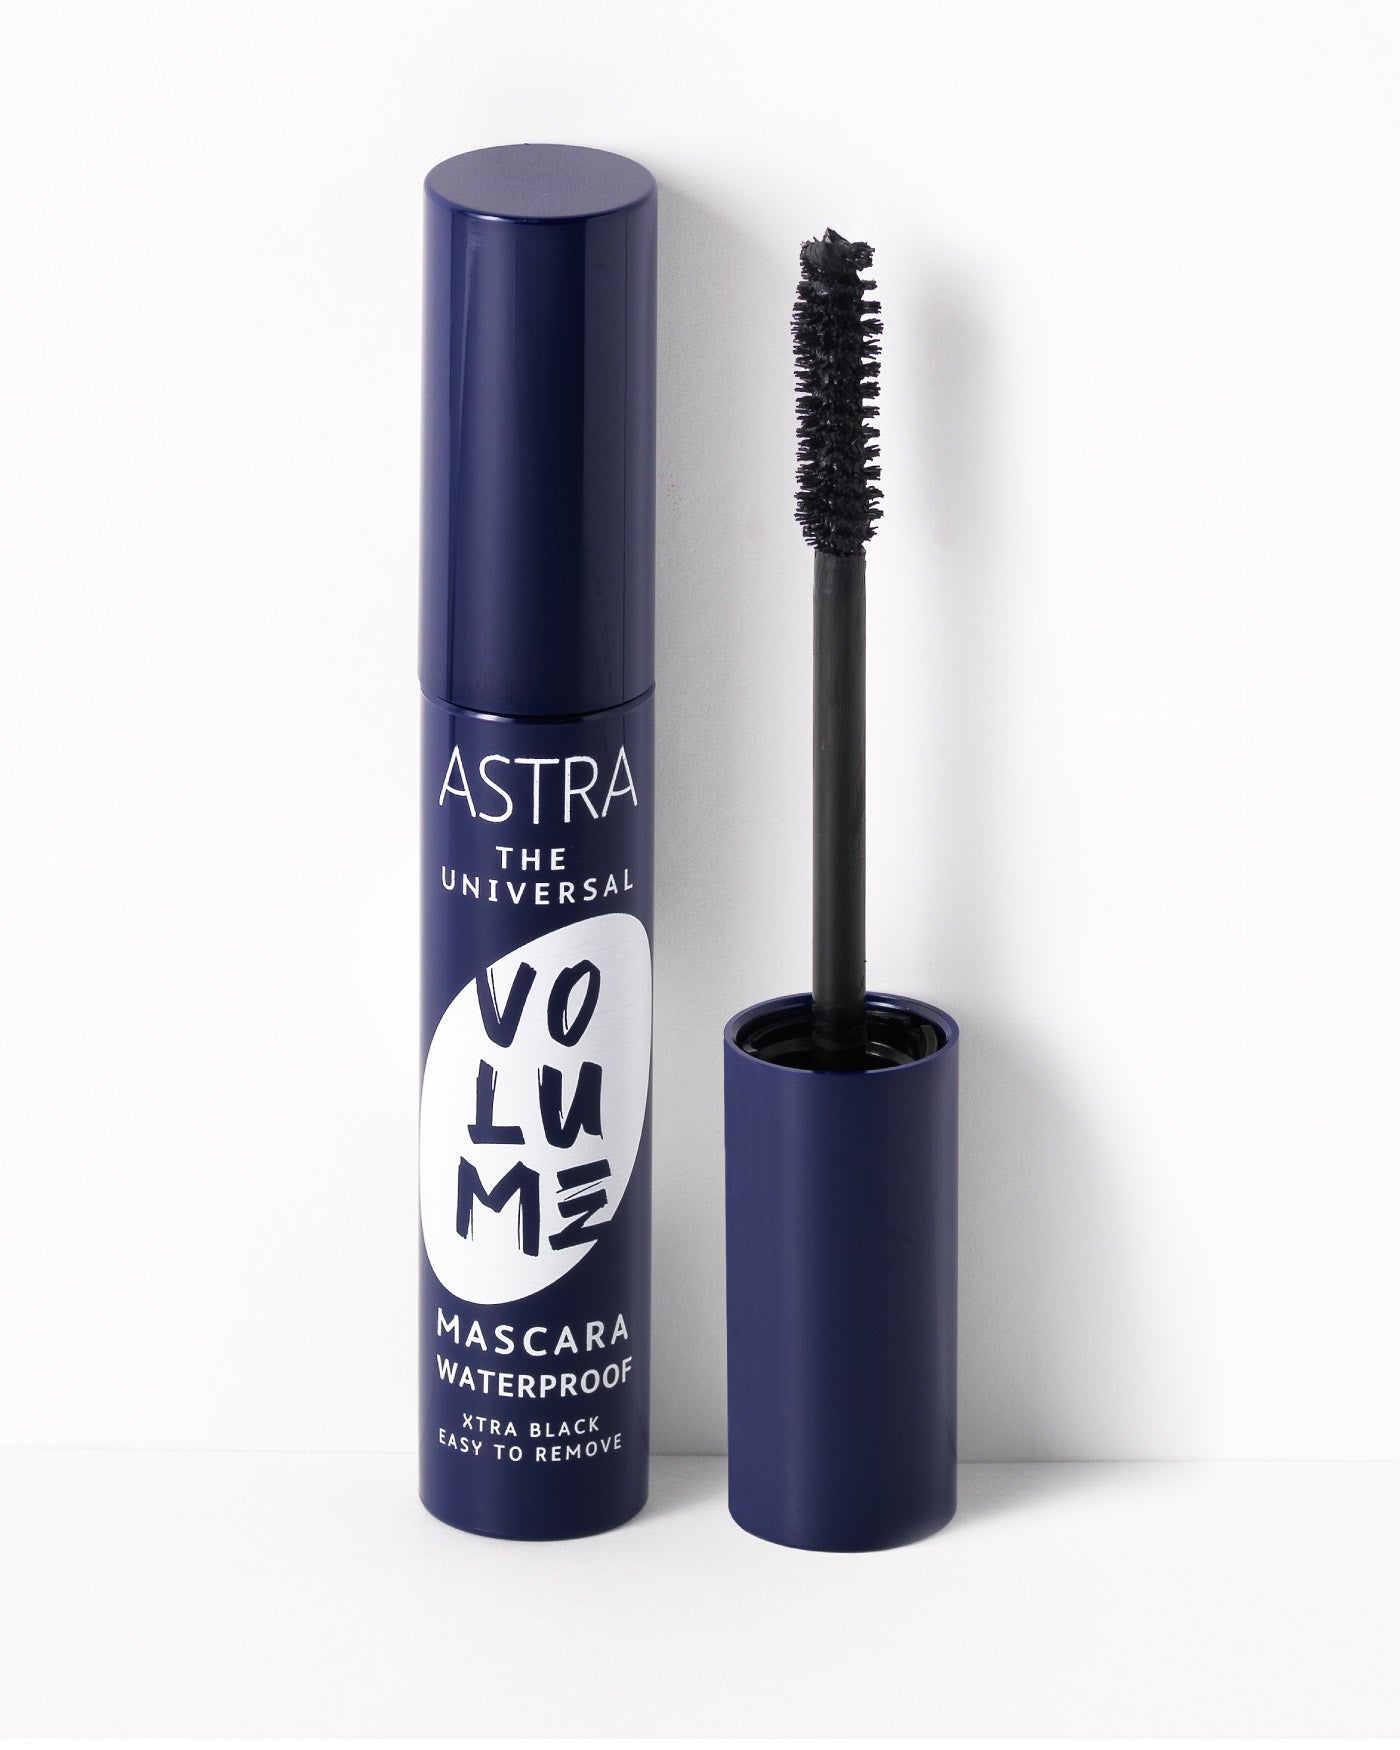 THE UNIVERSAL VOLUME MASCARA WATERPROOF - All Products - Astra Make-Up